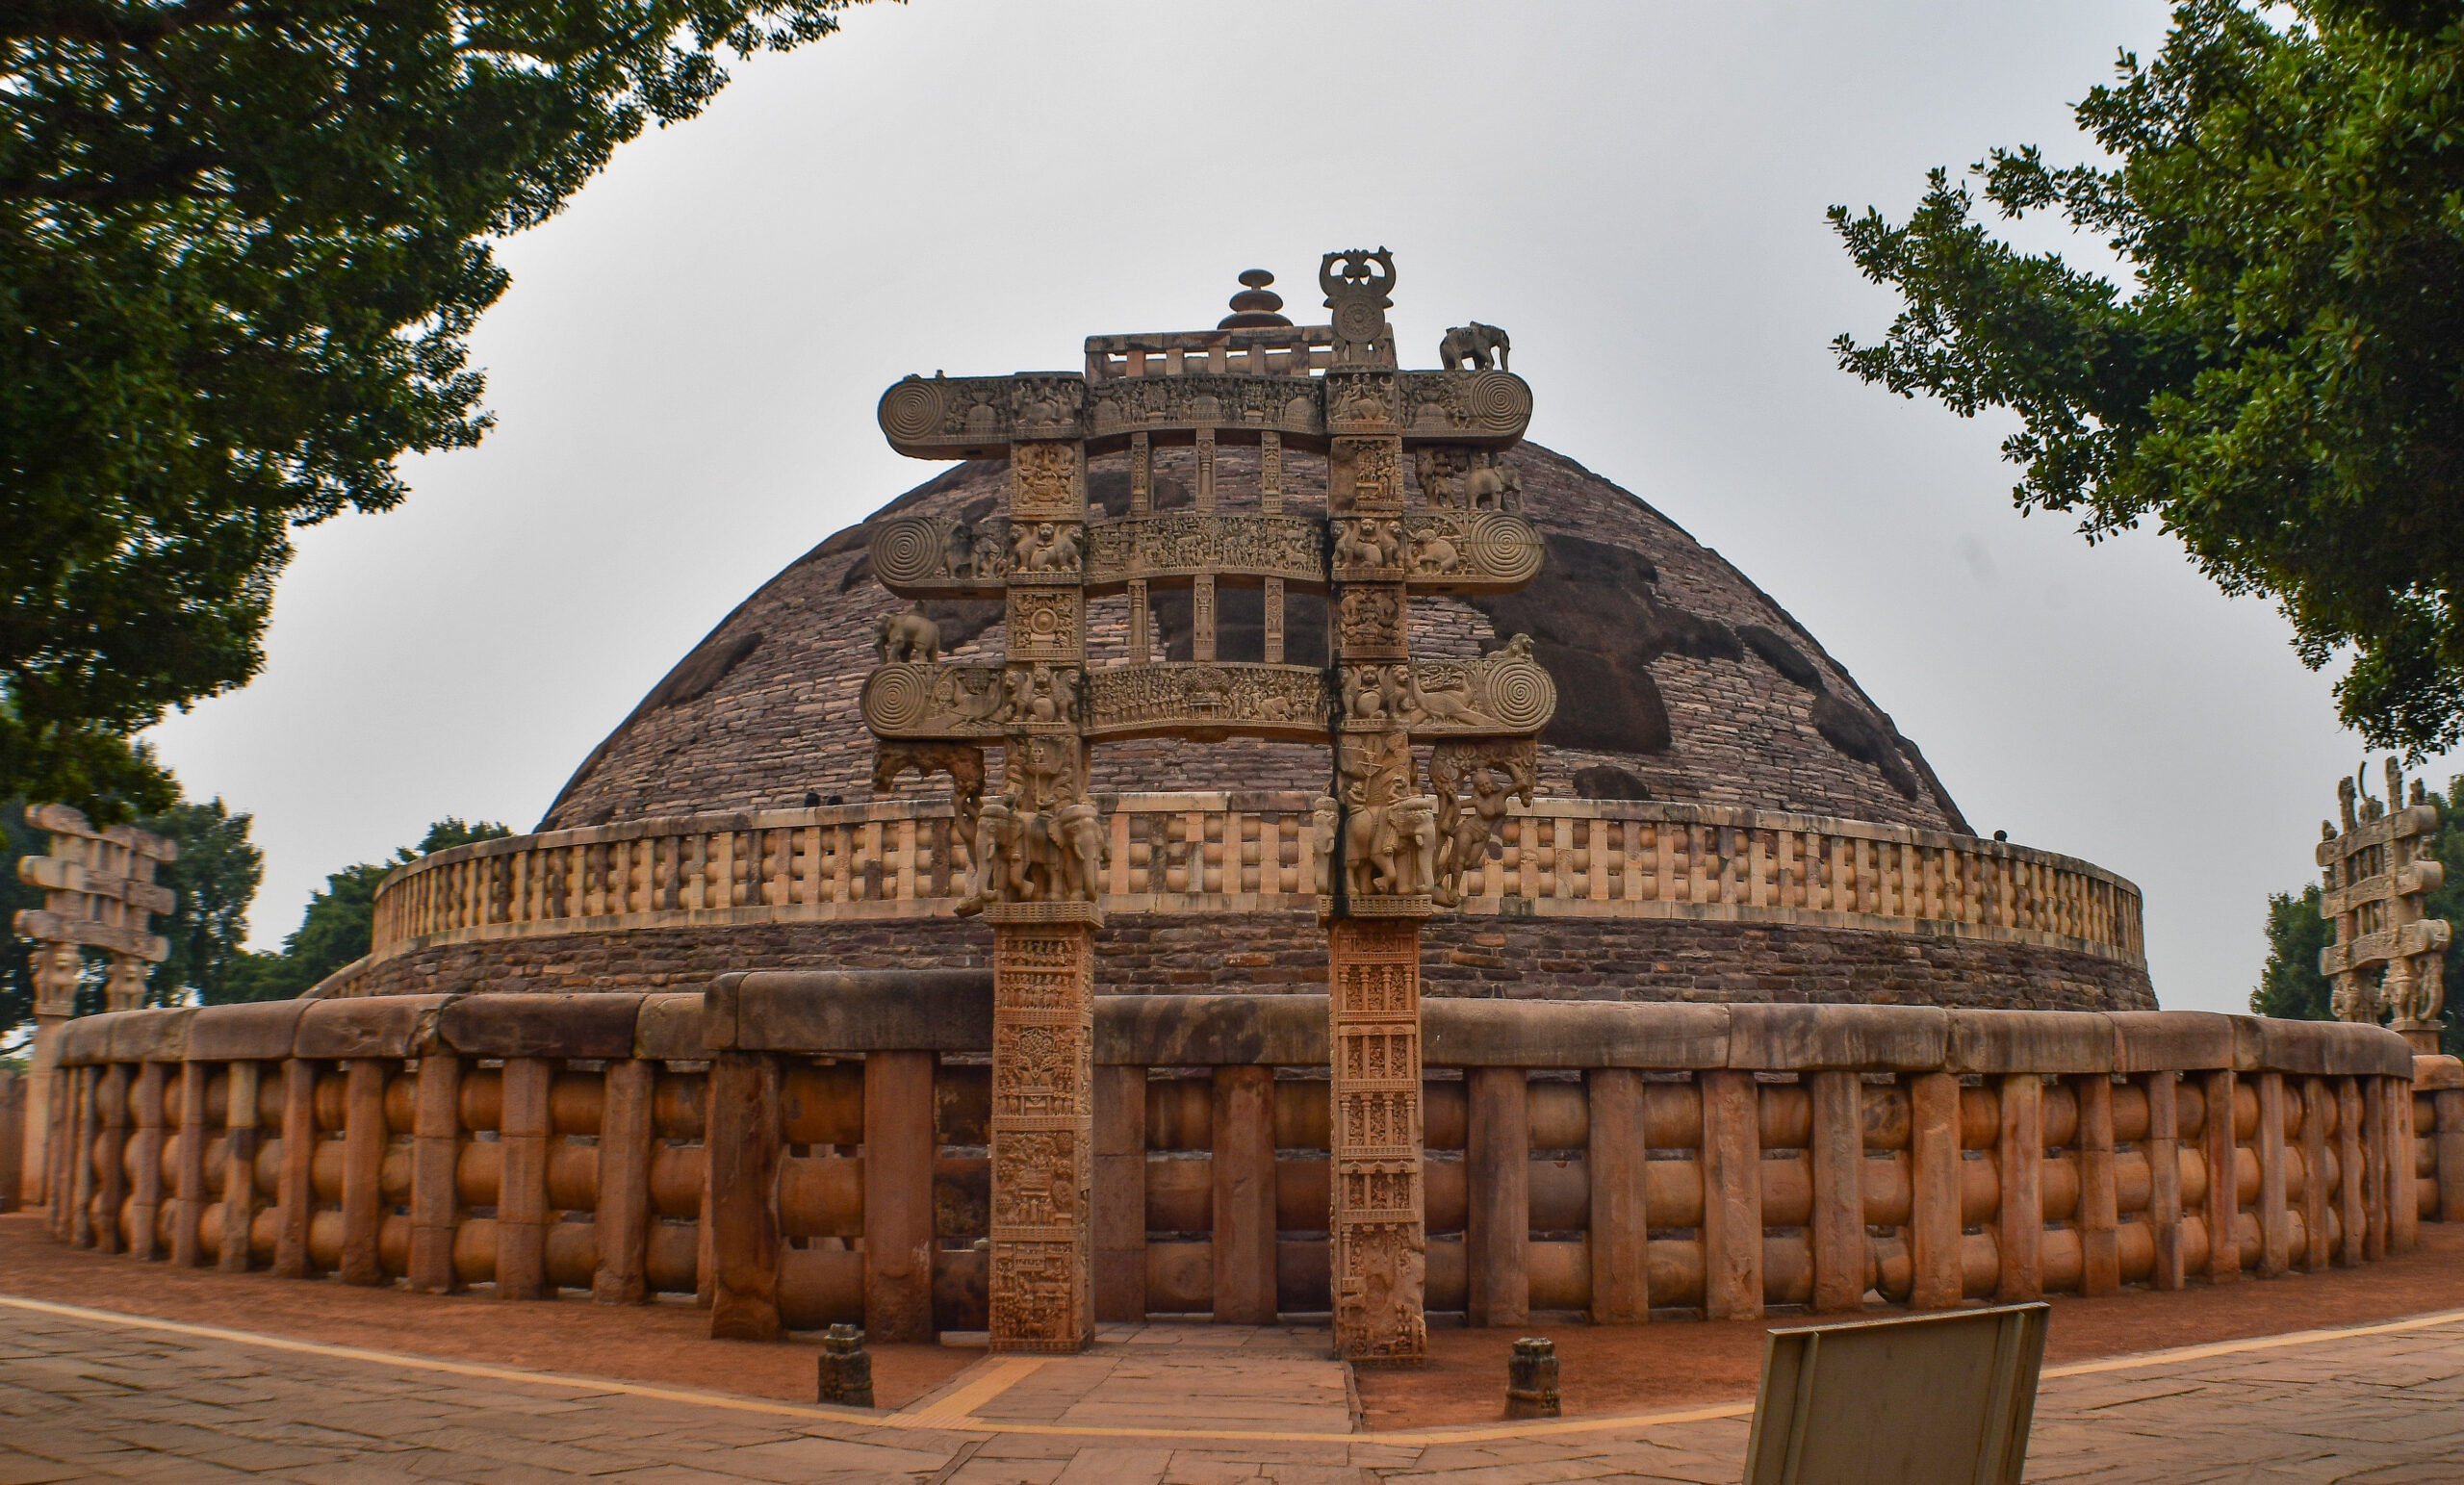 sanchi-the-site-of-stupas-so-many-travel-tales